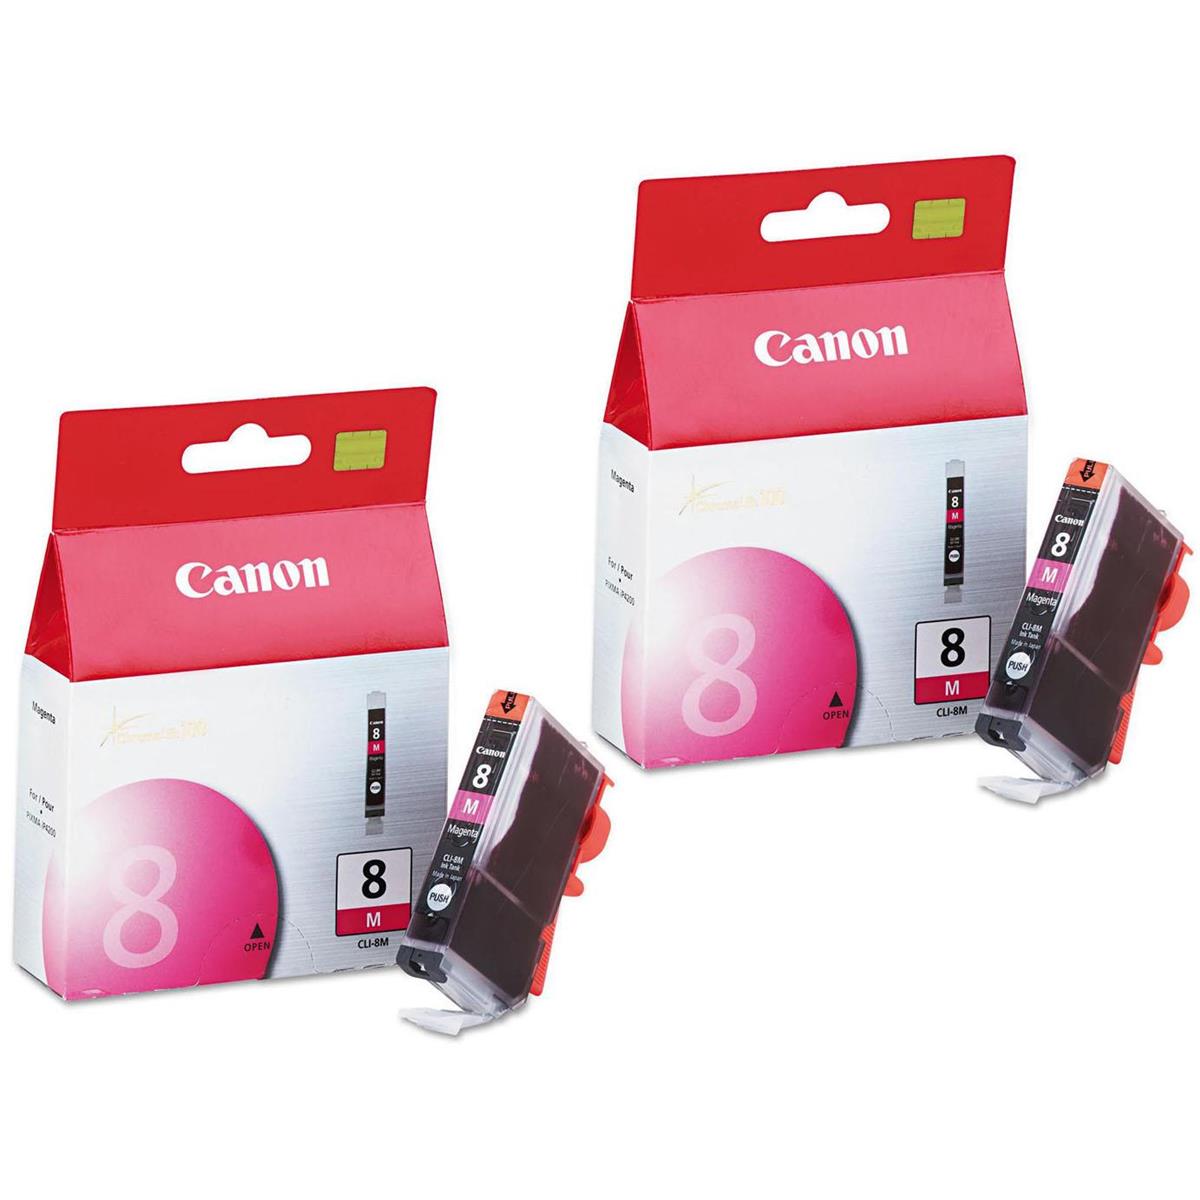 

Canon CLI-8M Magenta Ink Cartridge for the PIXMA iP, MP, MX & PRO Series, 2-Pack